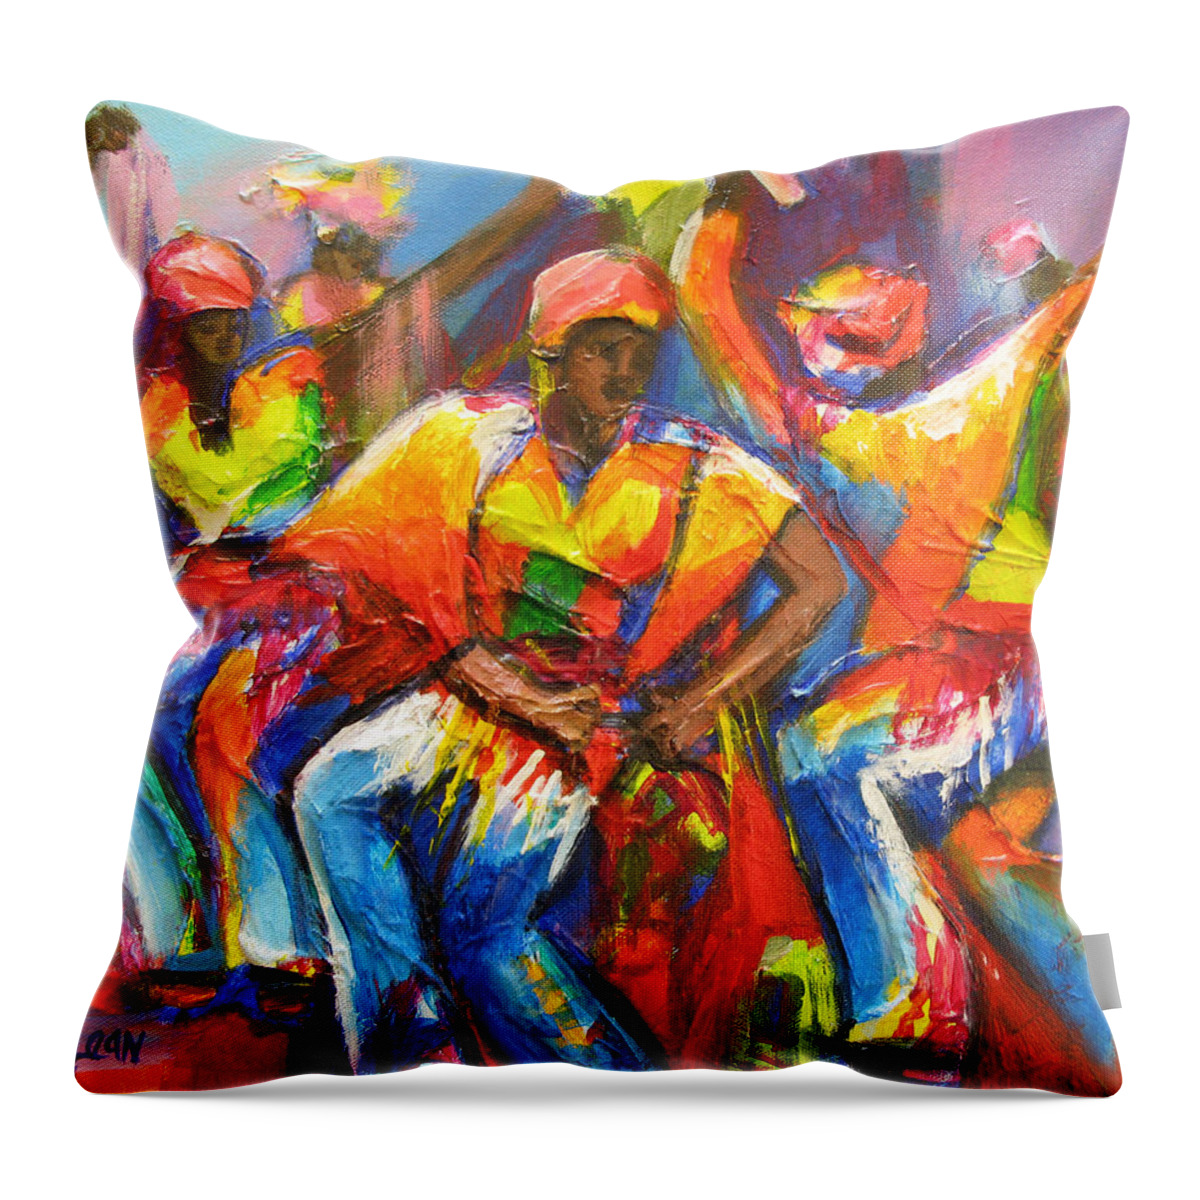 Carnival Throw Pillow featuring the painting Carnival Jump Up by Cynthia McLean